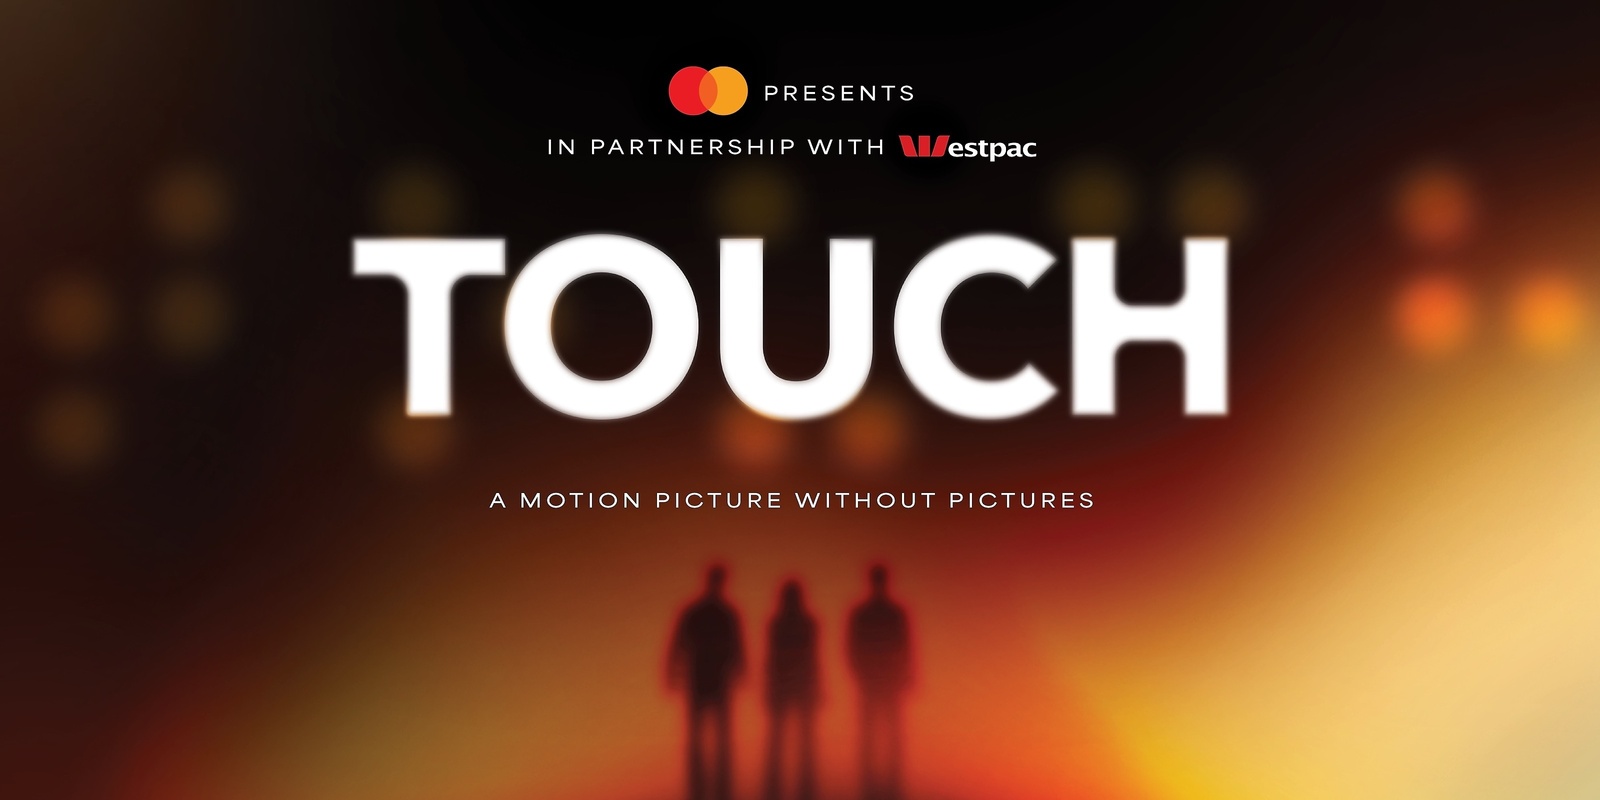 Banner image for Mastercard Touch Movie